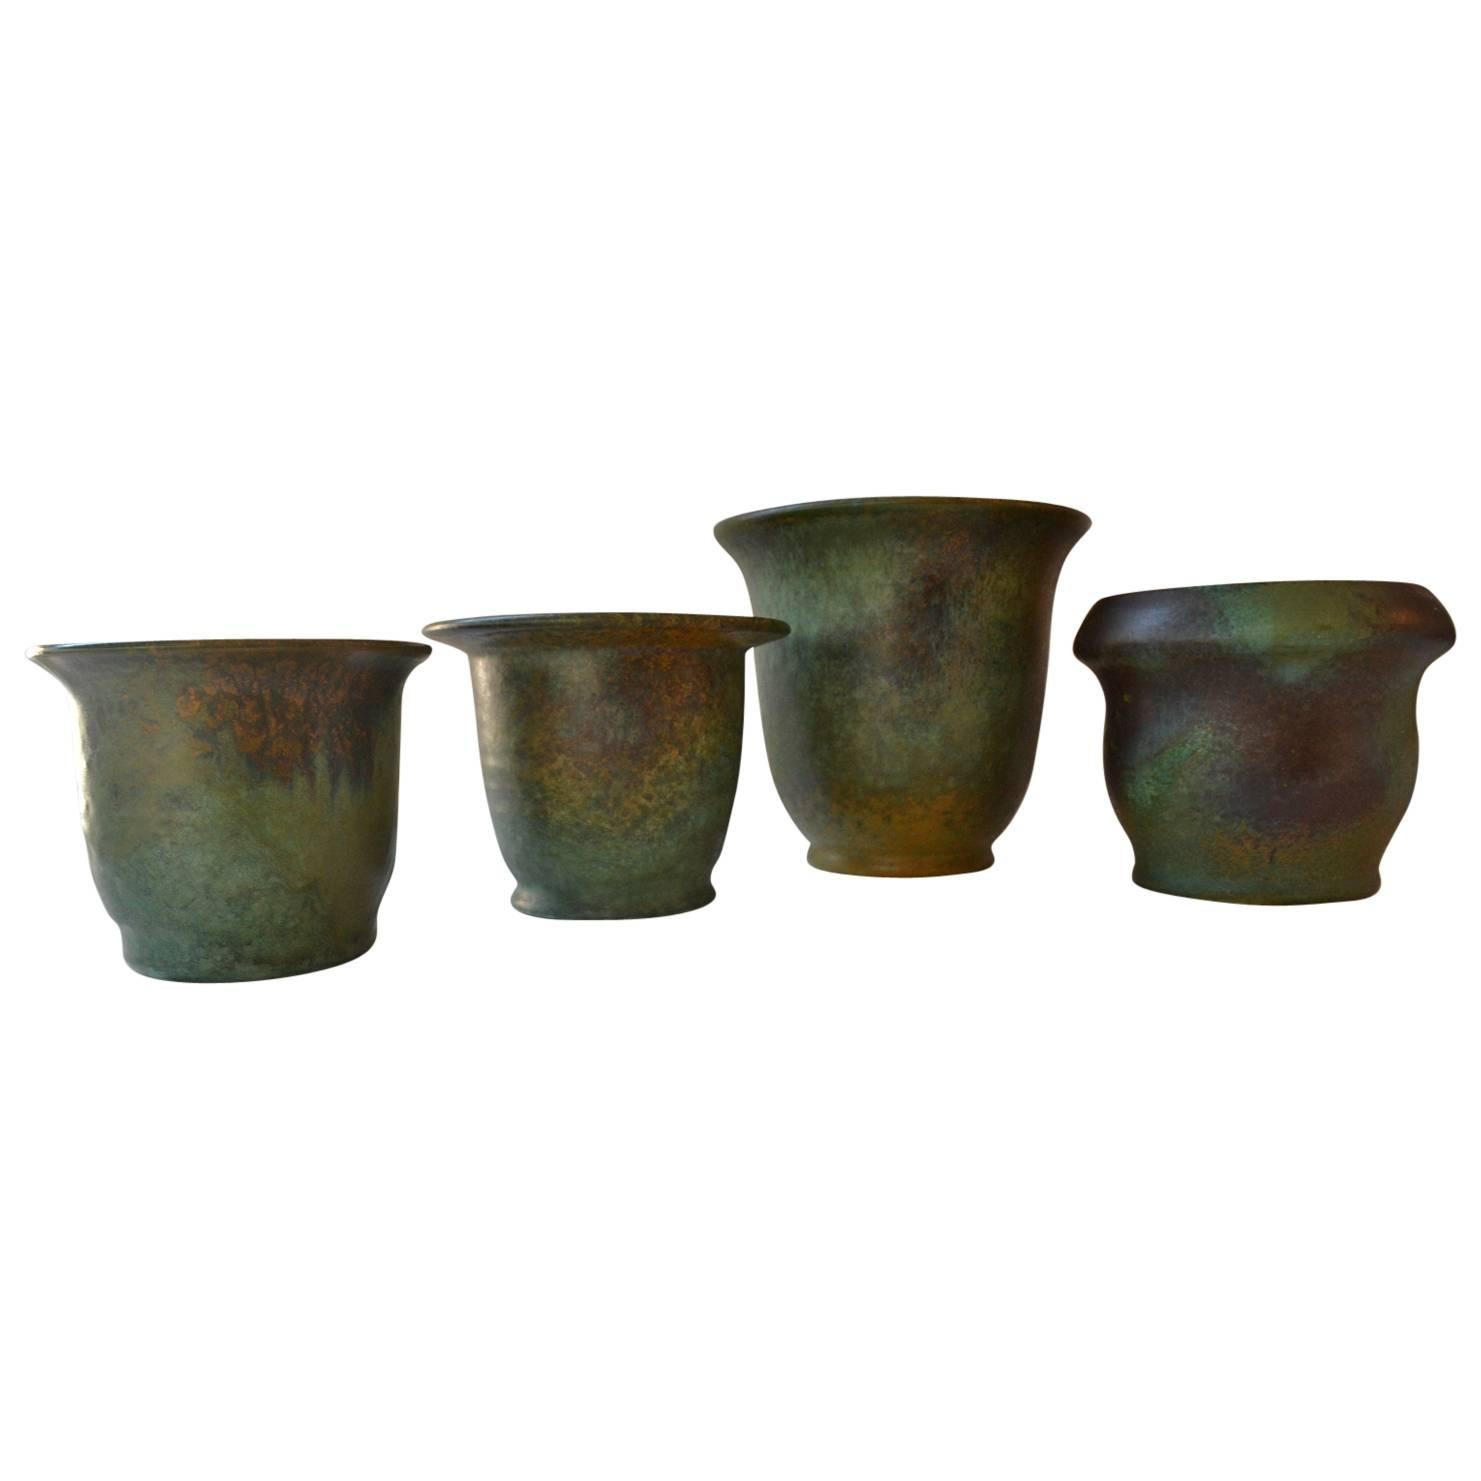 Group of four studio ceramic vases or flower pots in different sizes with subtile lively glaze like in oxidized copper, in typical Art Deco colors, signed by Dutch Frans van Katwijk.